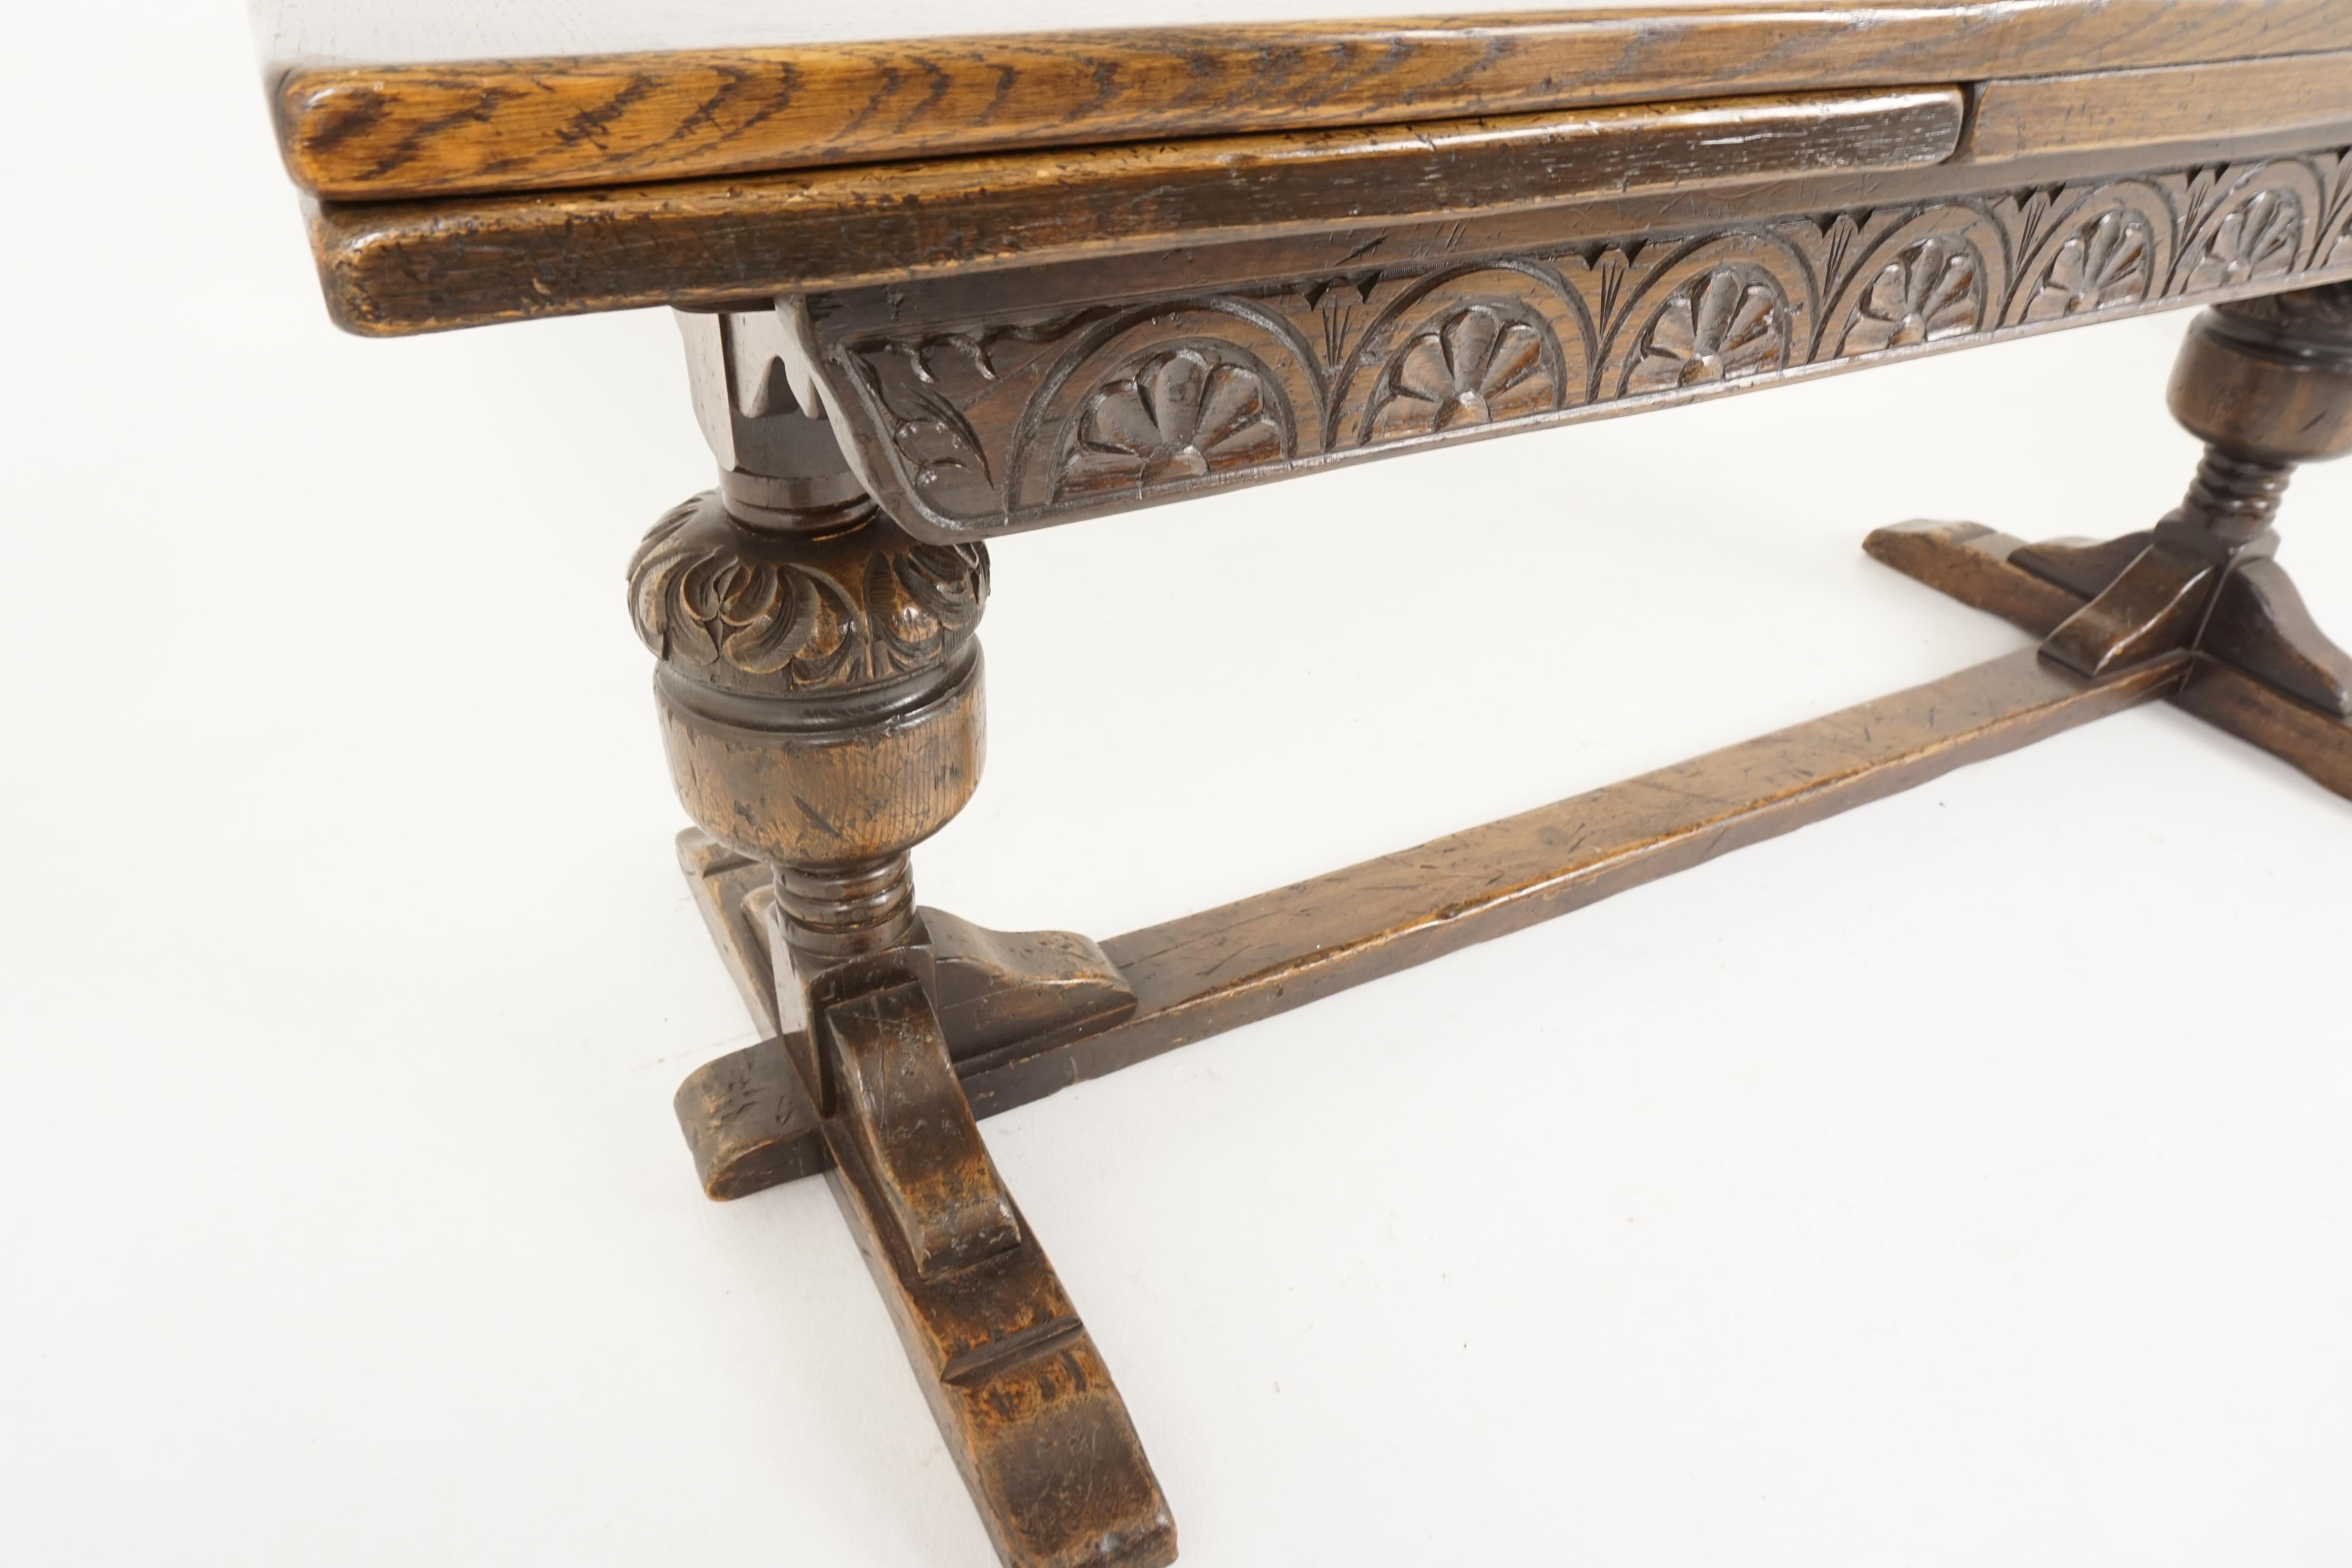 Antique refectory farm house table, pull out table, Scotland 1930, B2321

Scotland 1930
Solid oak
Original finish
Rectangular moulded top
Two pull out leaves on the end
Lovely carved shirt underneath
All supported by a pair of large baluster